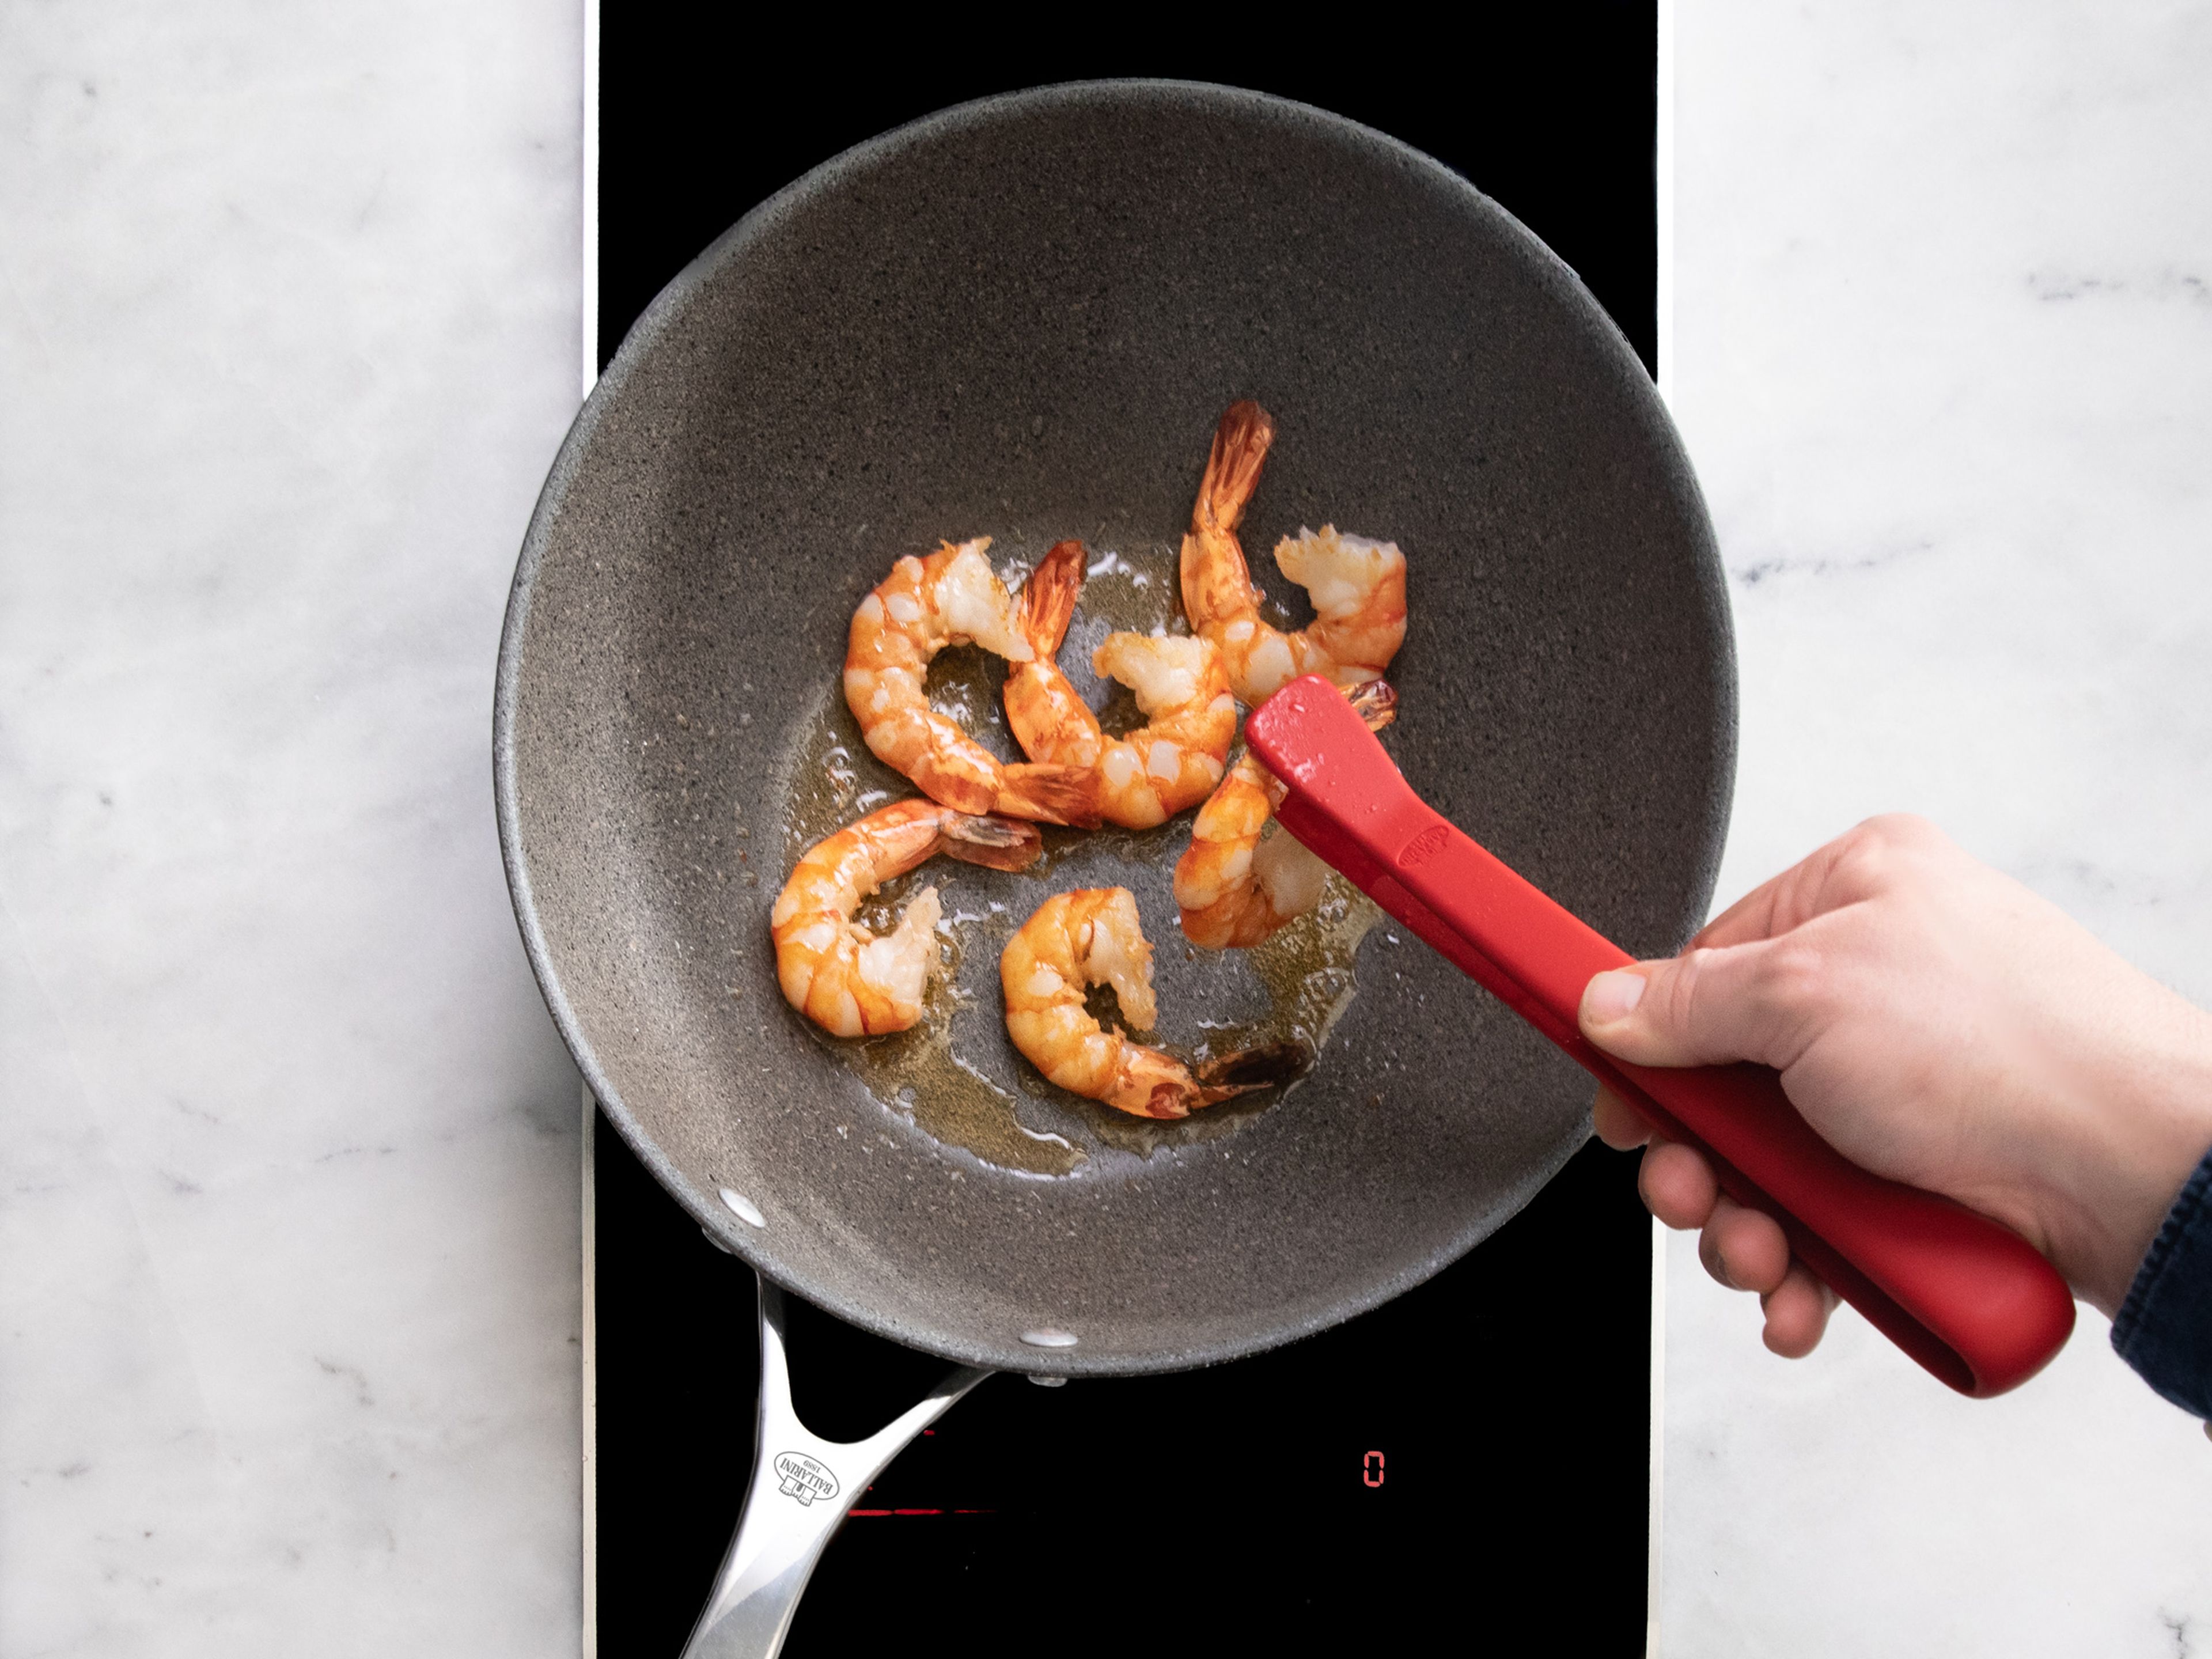 Heat a large frying pan over medium-high heat. Add vegetable oil and fry the shrimp on each side for approx. 2 min., then remove from the pan. Next fry the calamari rings. Add garlic and tomatoes and cook for approx. 2 min.